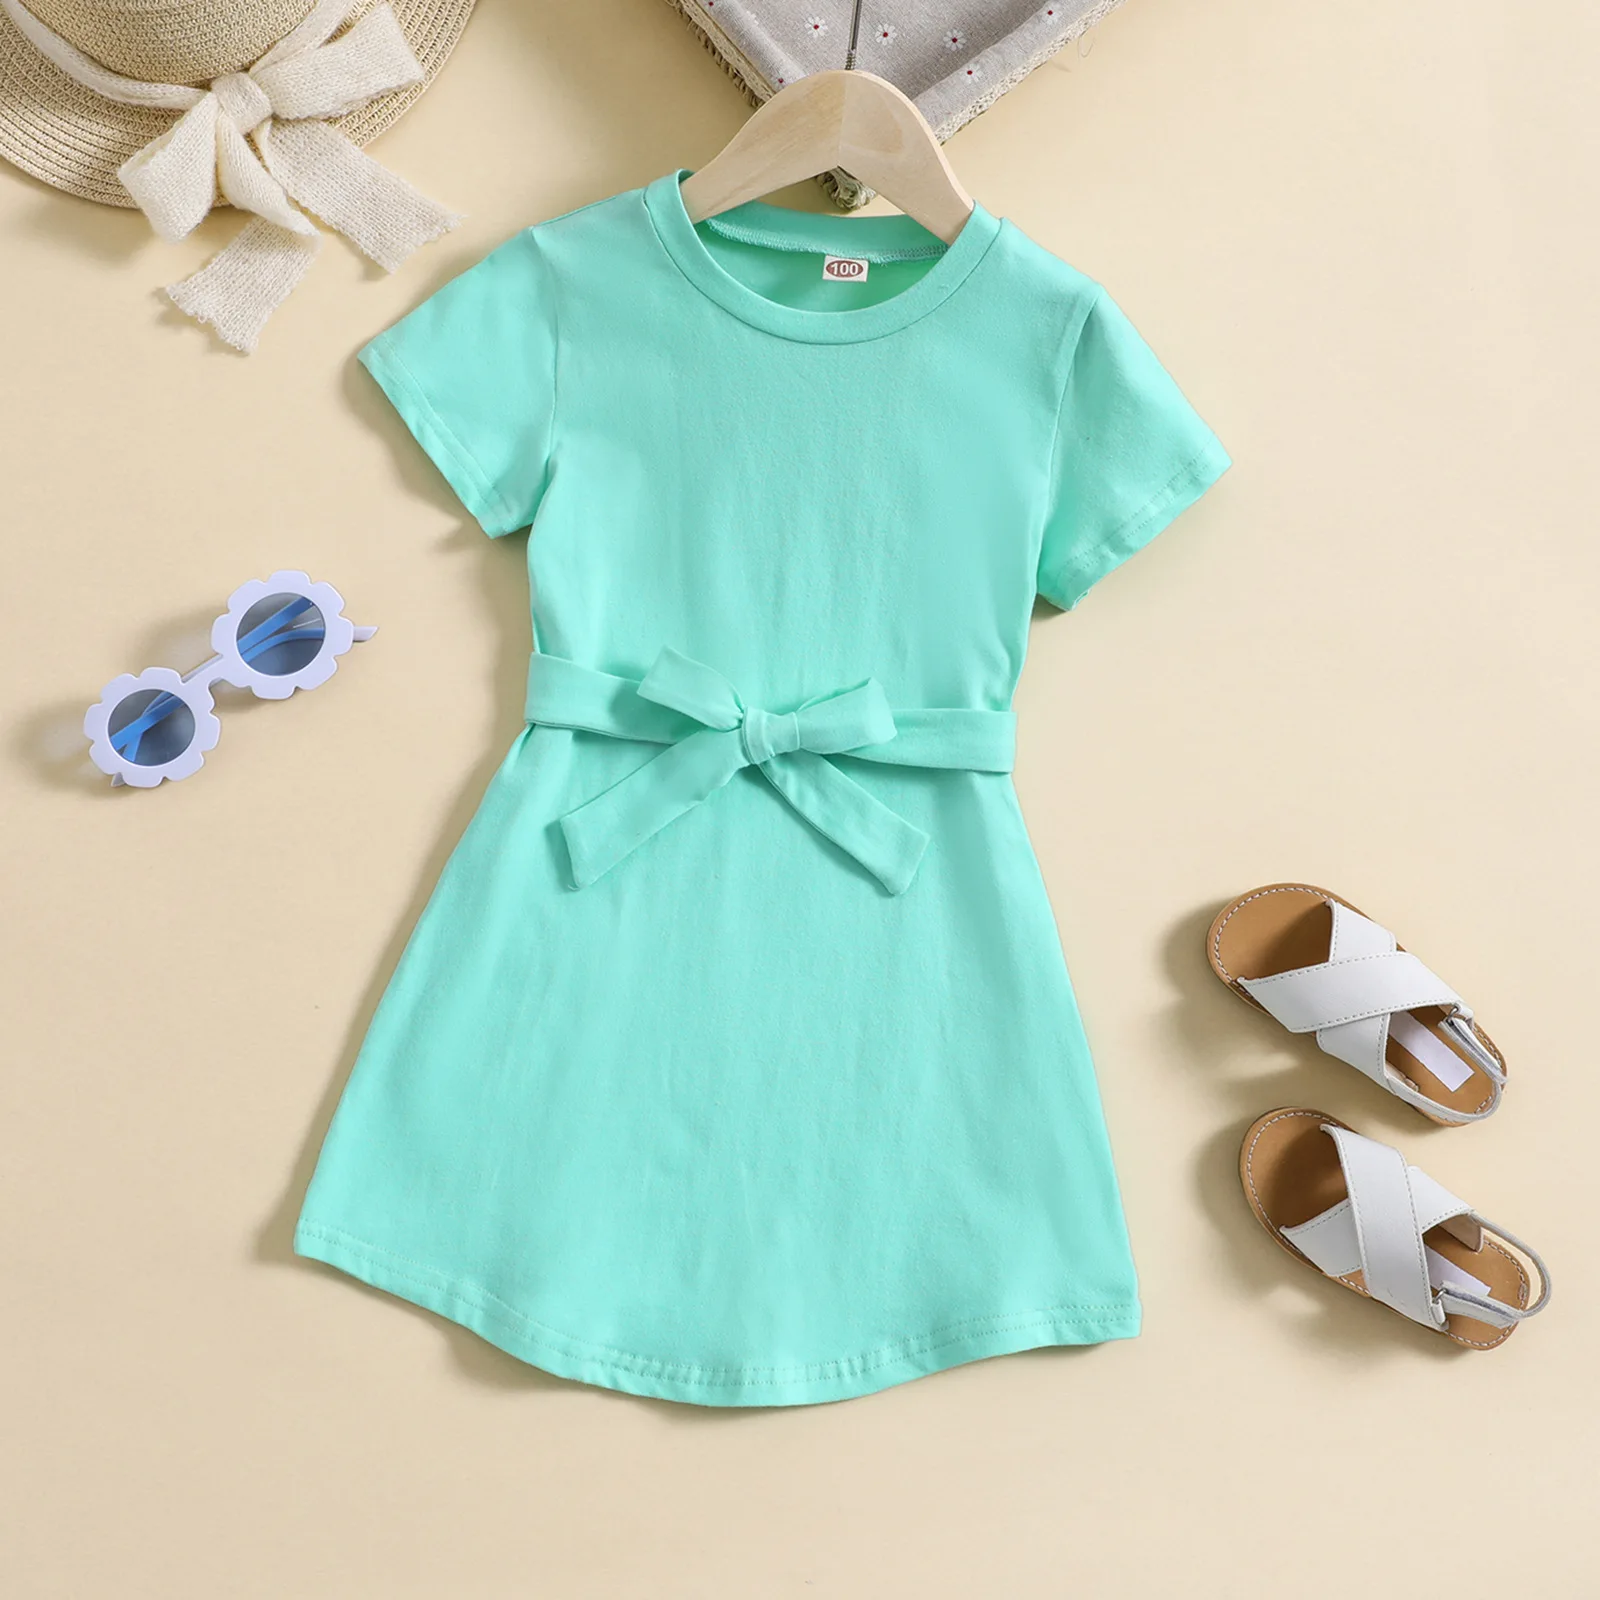 RTS 2023 summer girl's dresses candy-color cotton toddler kids short sleeve bow tie children casual dresses